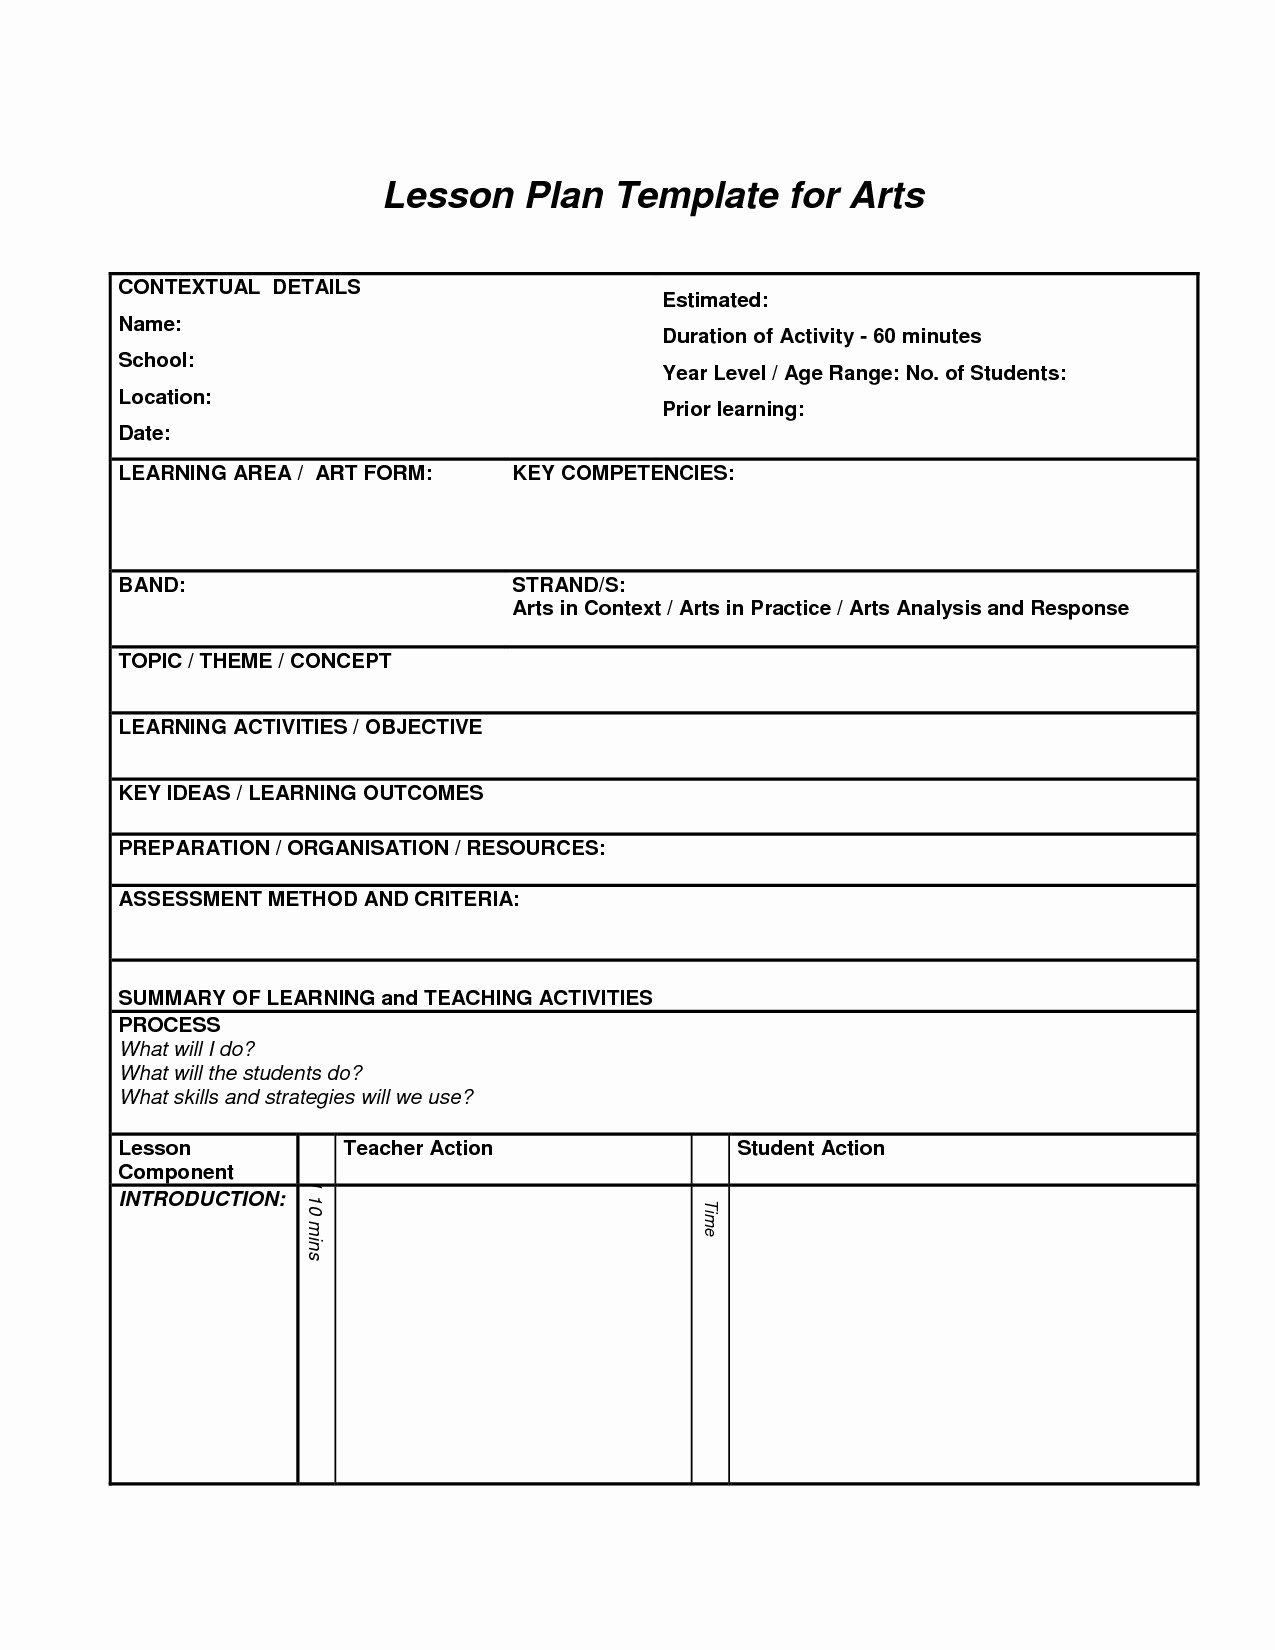 Lesson Plan format Template Best Of Lesson Plan Template for Arts